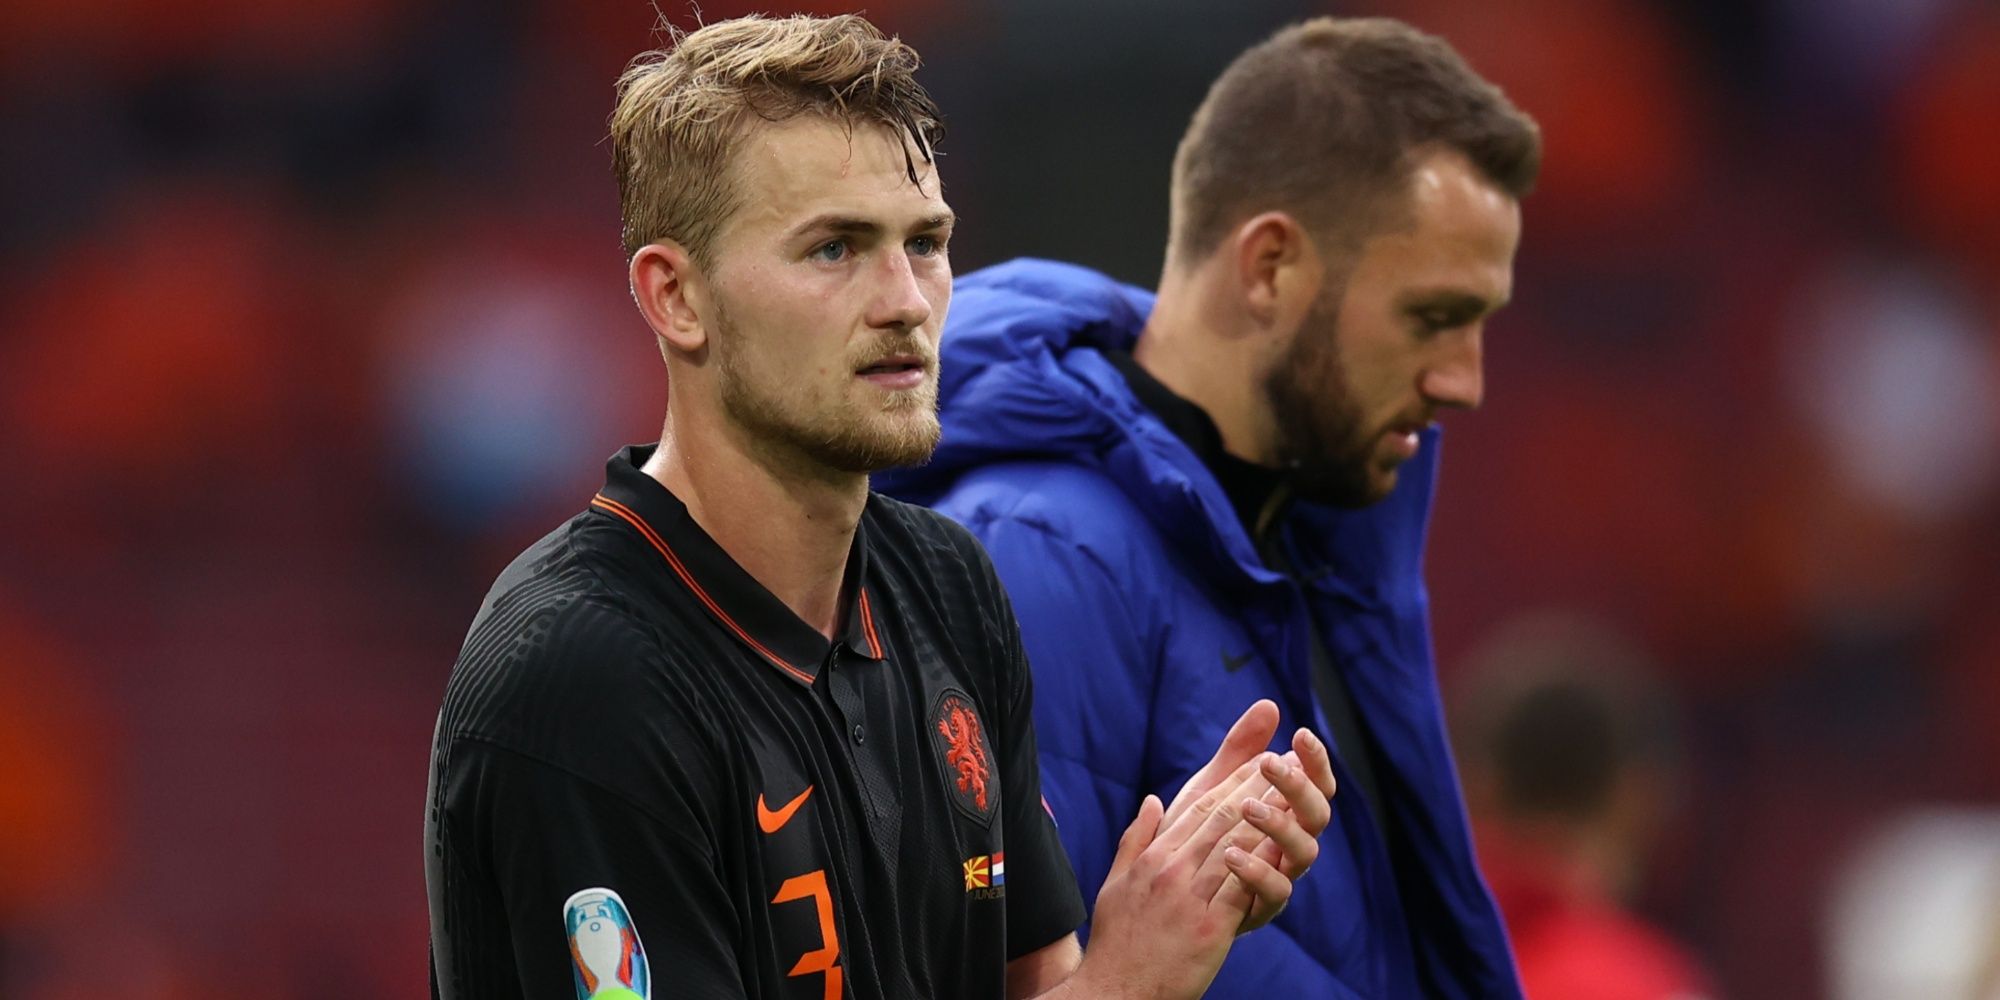 Matthijs de Ligt clapping at EURO 2020